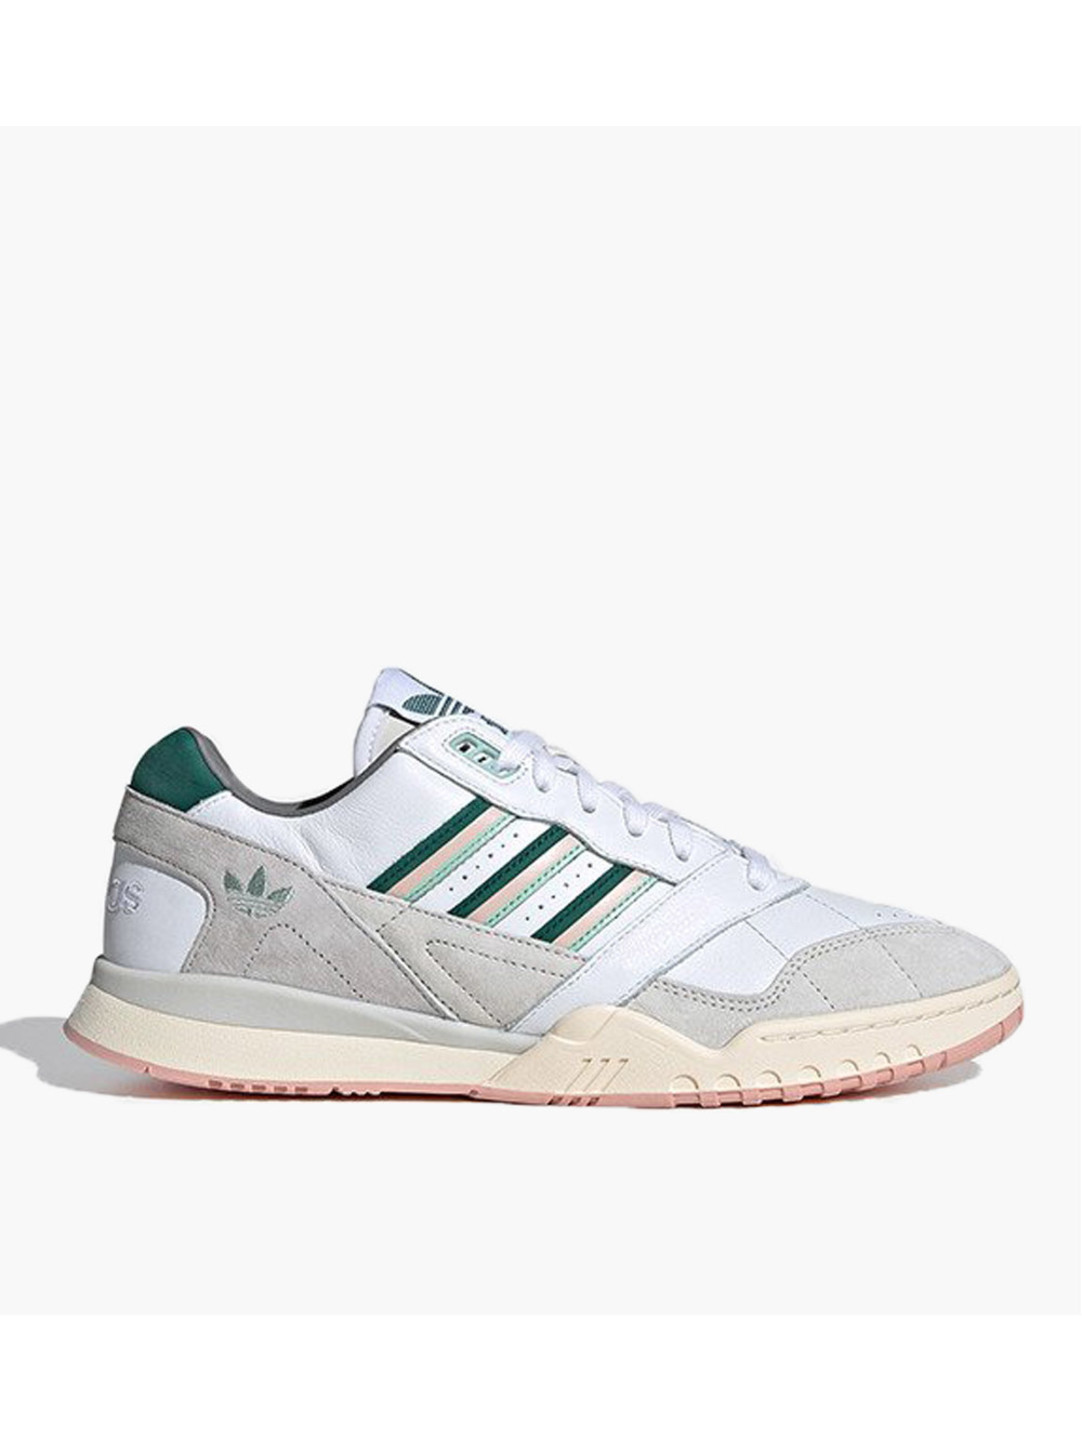 Adidas AR Trainer Running White Collegiate Green Vapour Pink - Baskèts  Stores Amsterdam